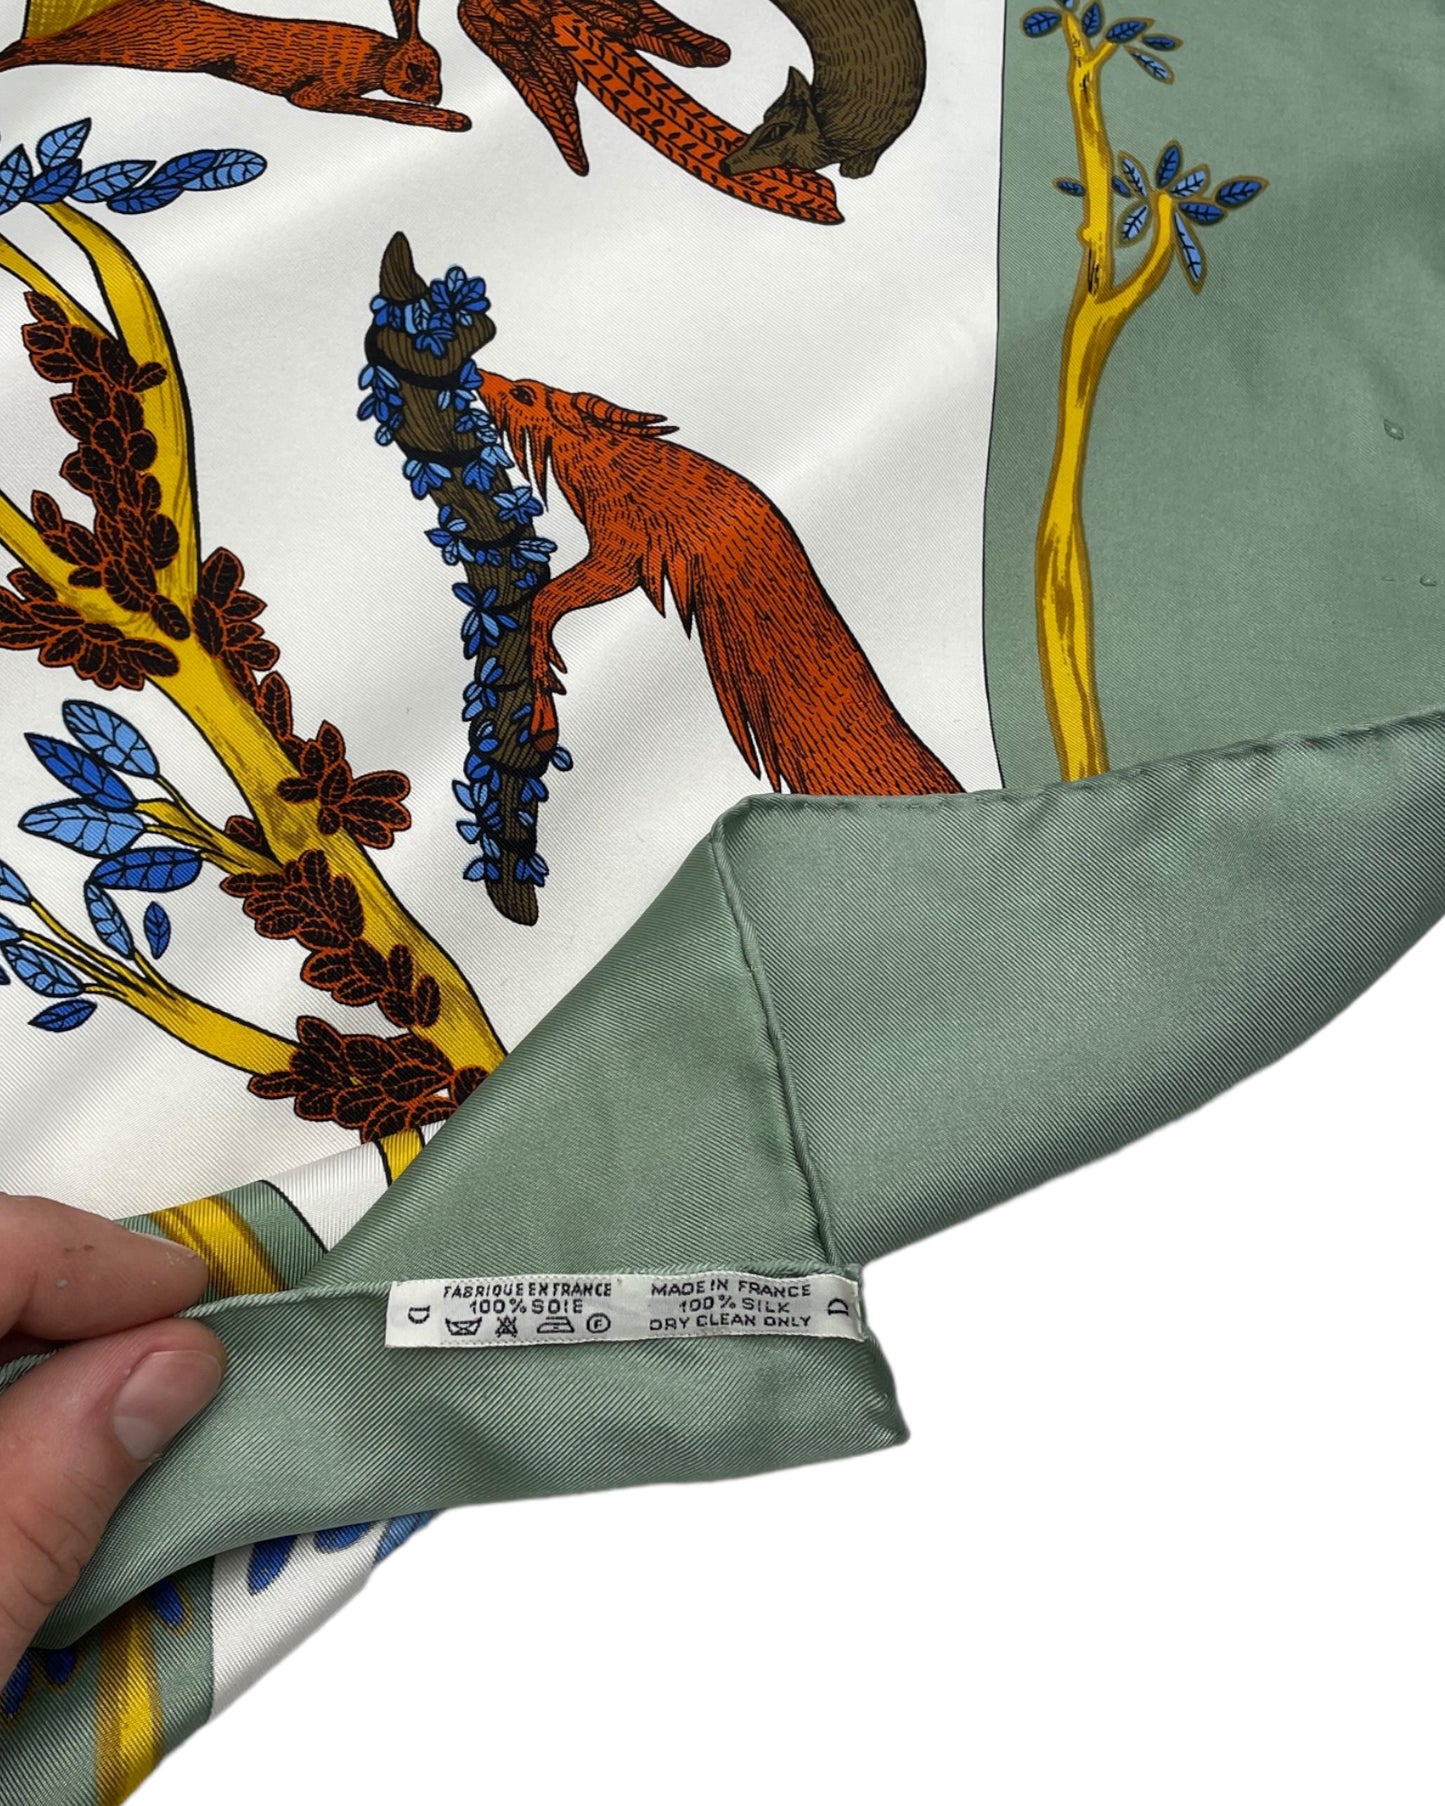 1990s Hermes Woodland Creatures Scarf